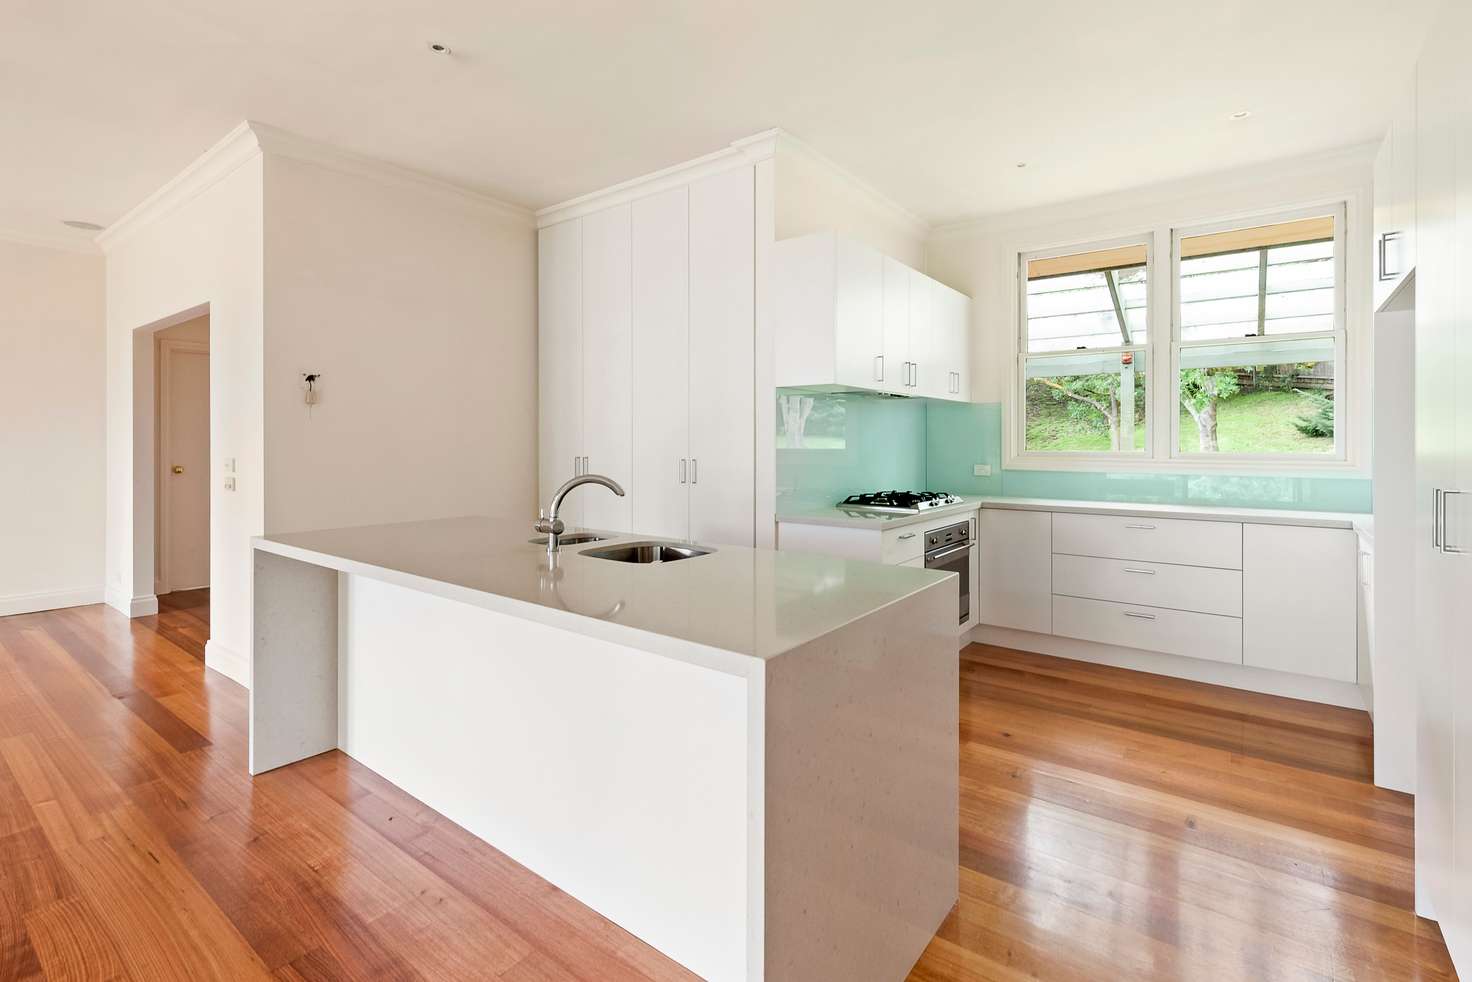 Main view of Homely house listing, 2 Beluga Street, Mount Eliza VIC 3930